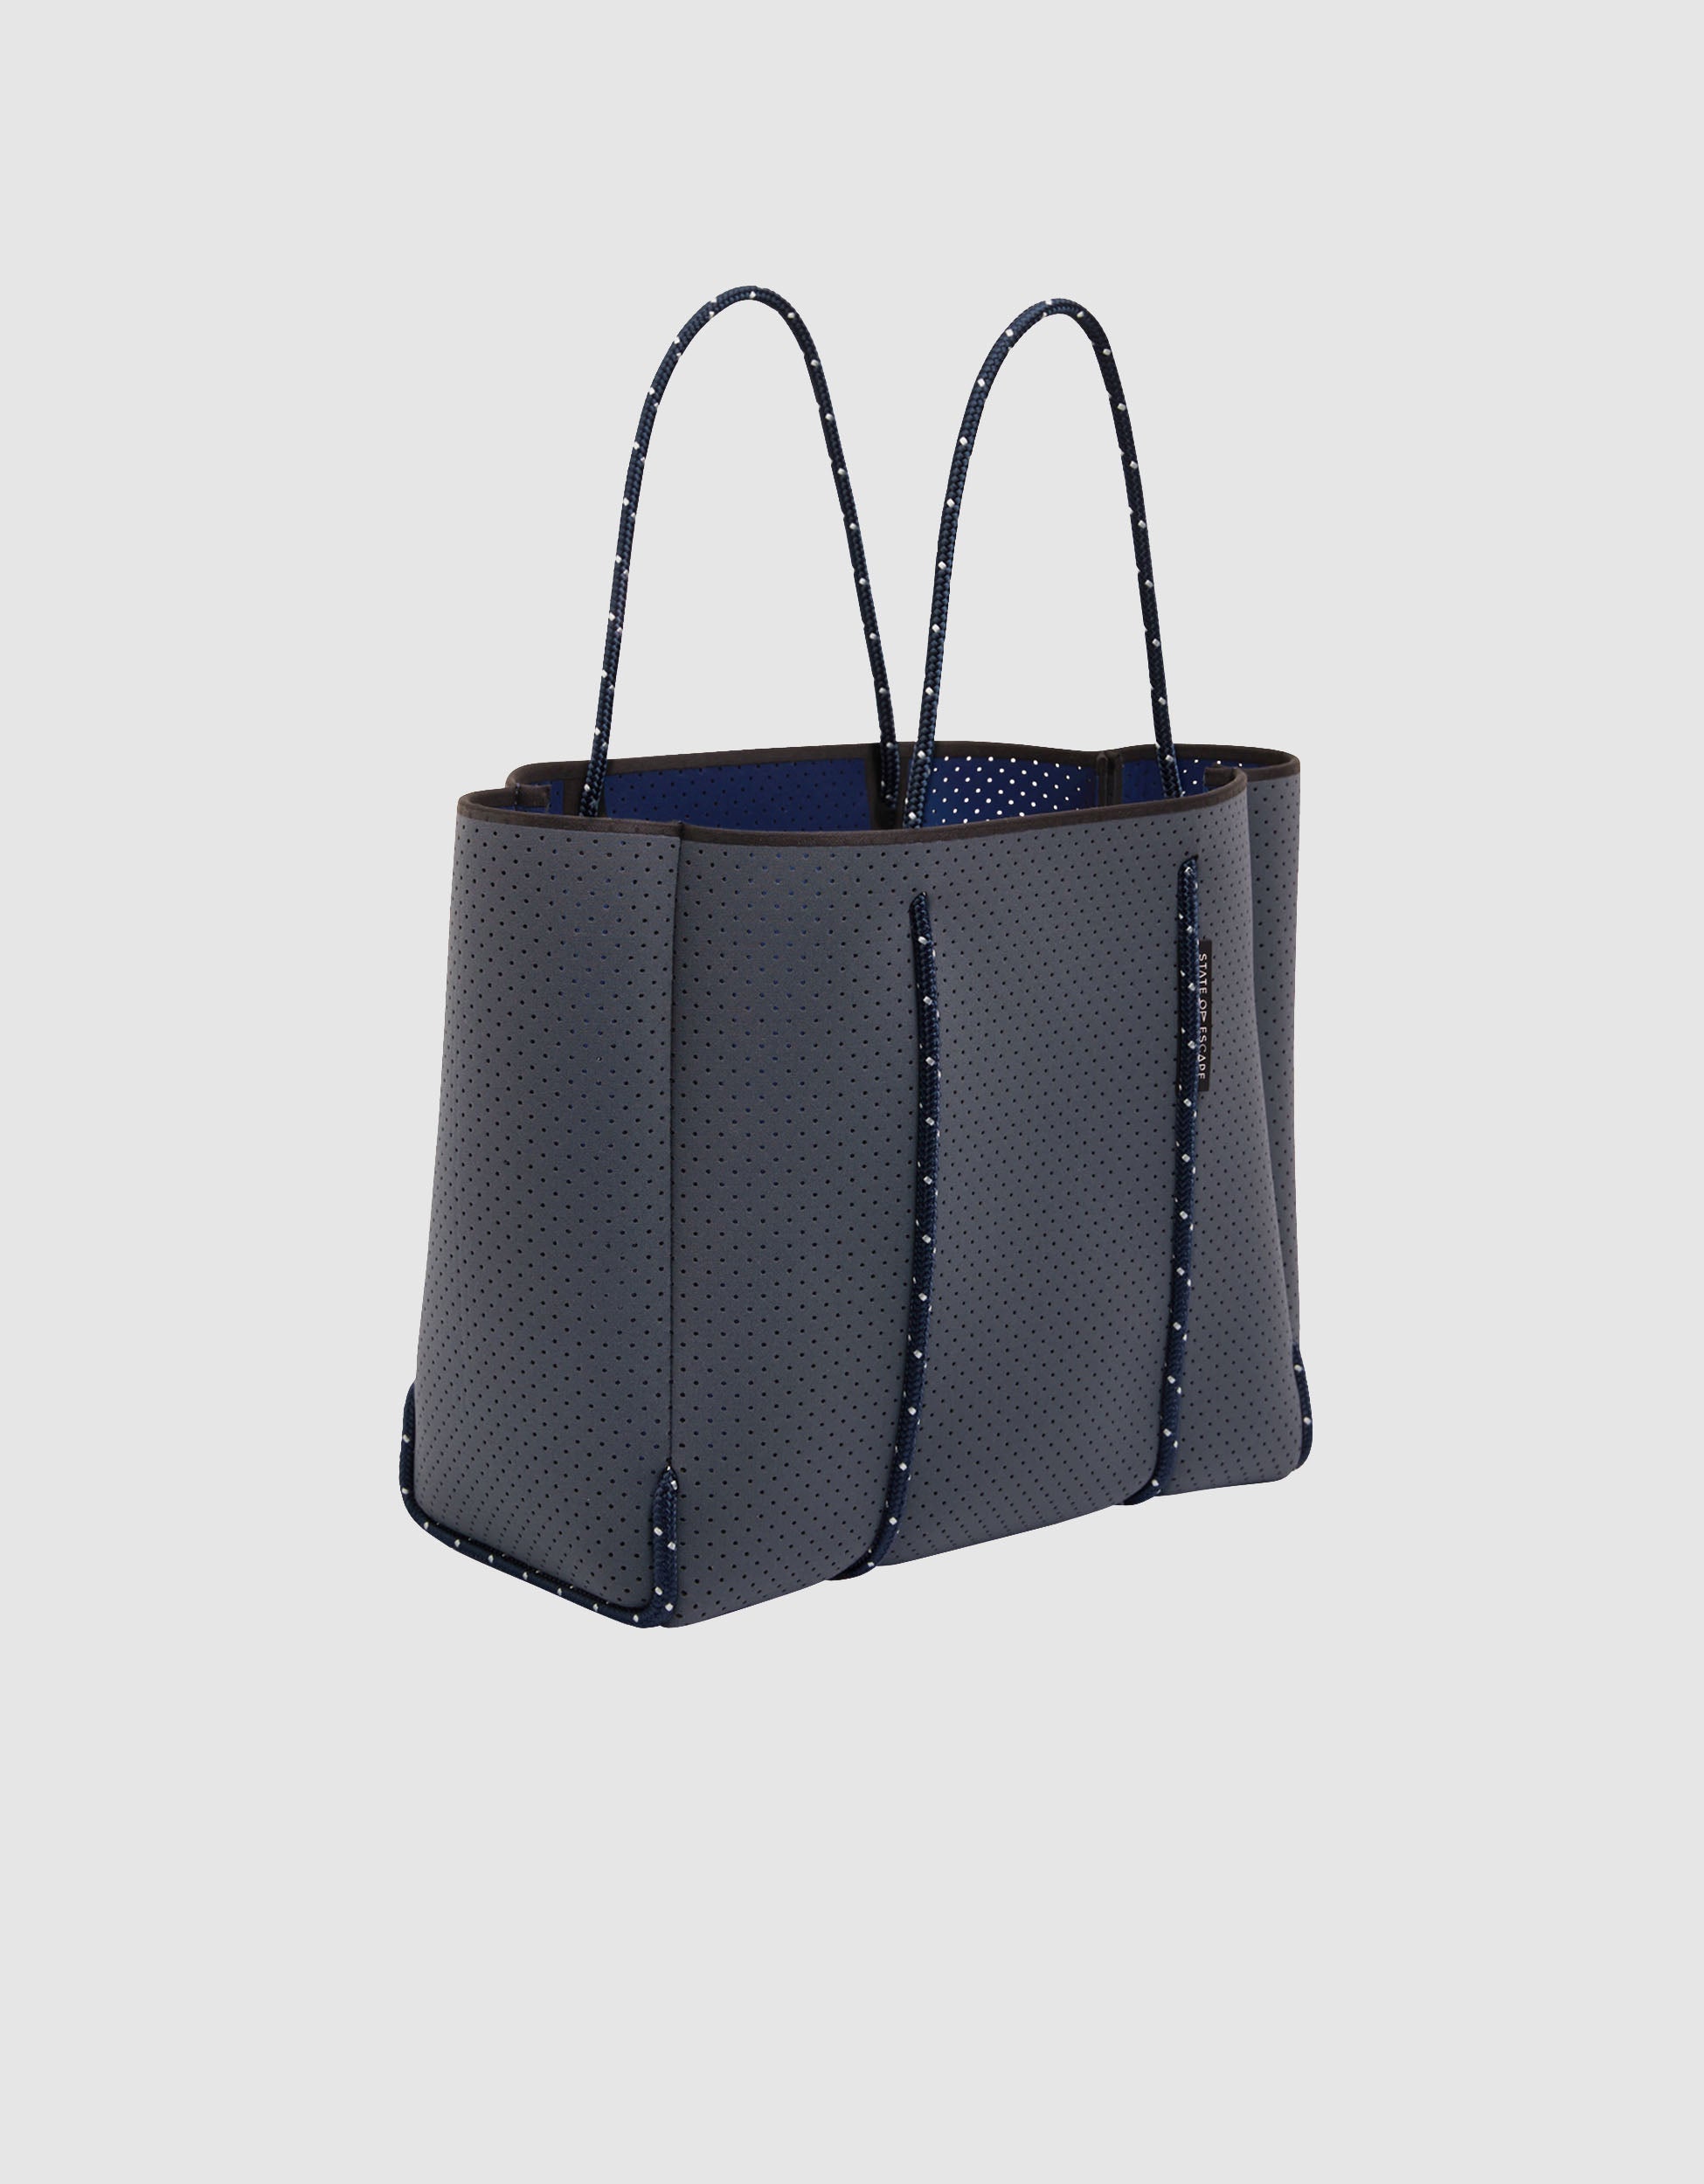 Flying solo tote in pewter / navy – State of Escape